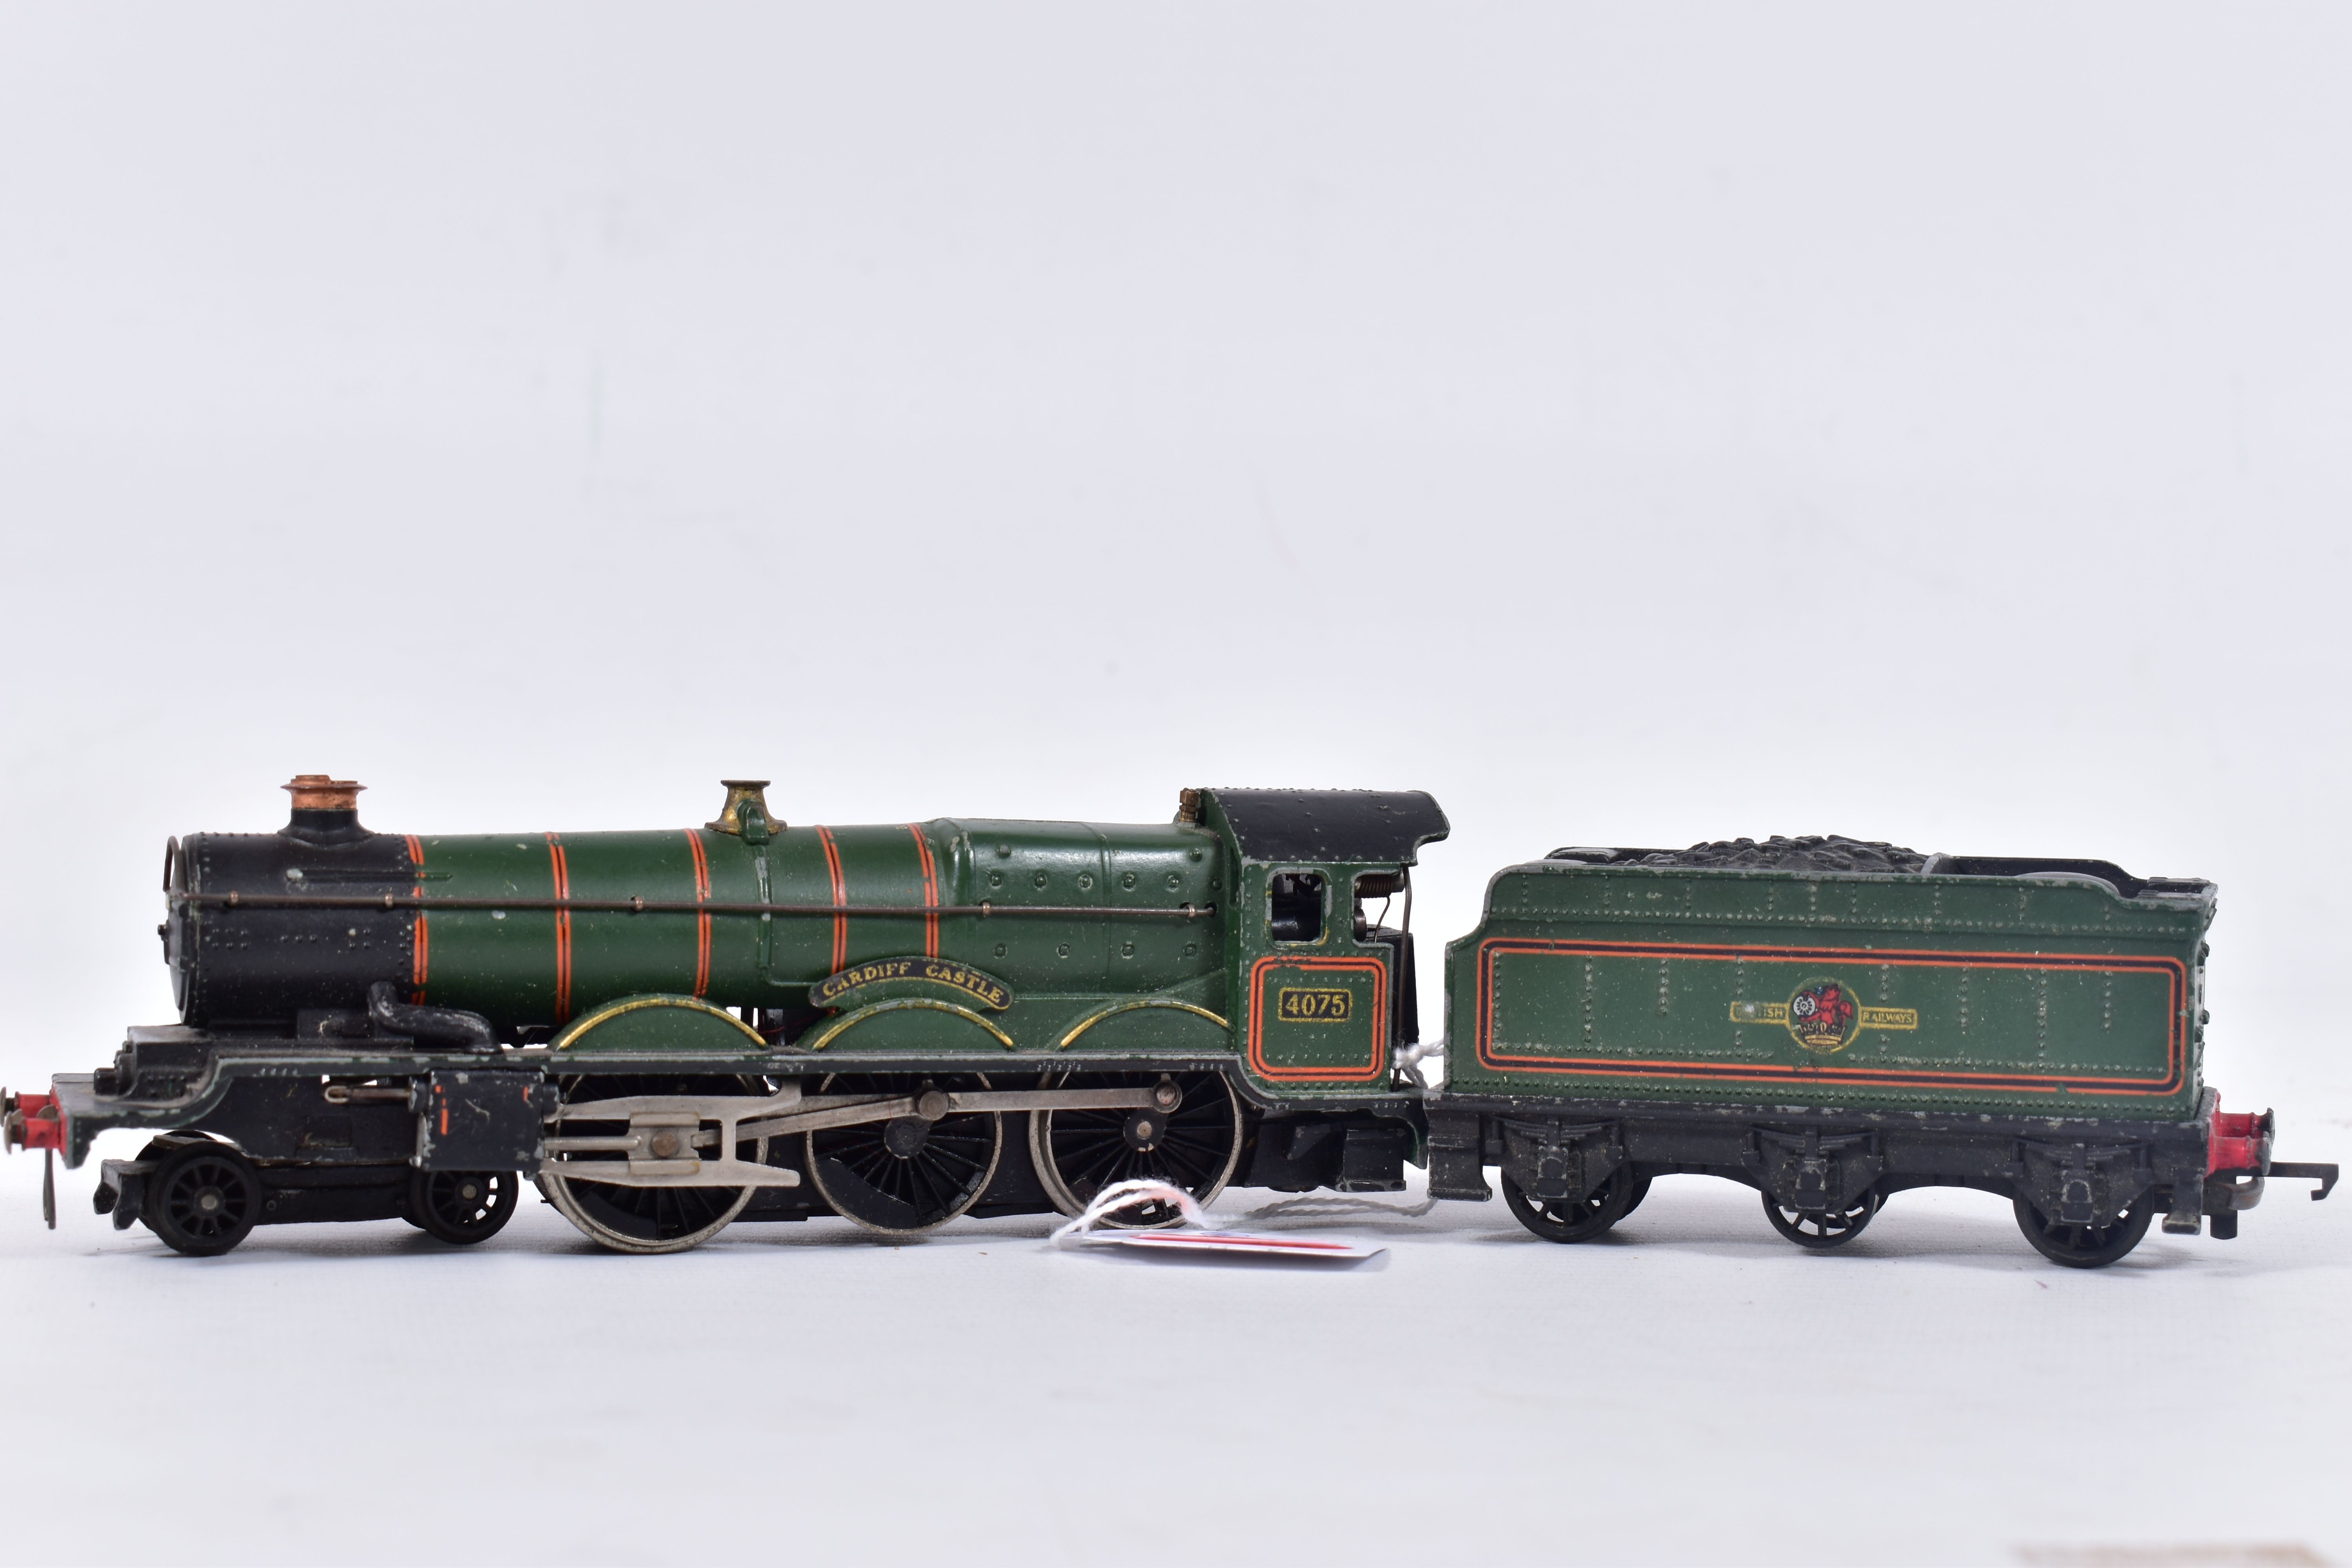 A BOXED HORNBY DUBLO CASTLE CLASS LOCOMOTIVE, 'Cardiff Castle' No.4075, B.R. lined green livery (